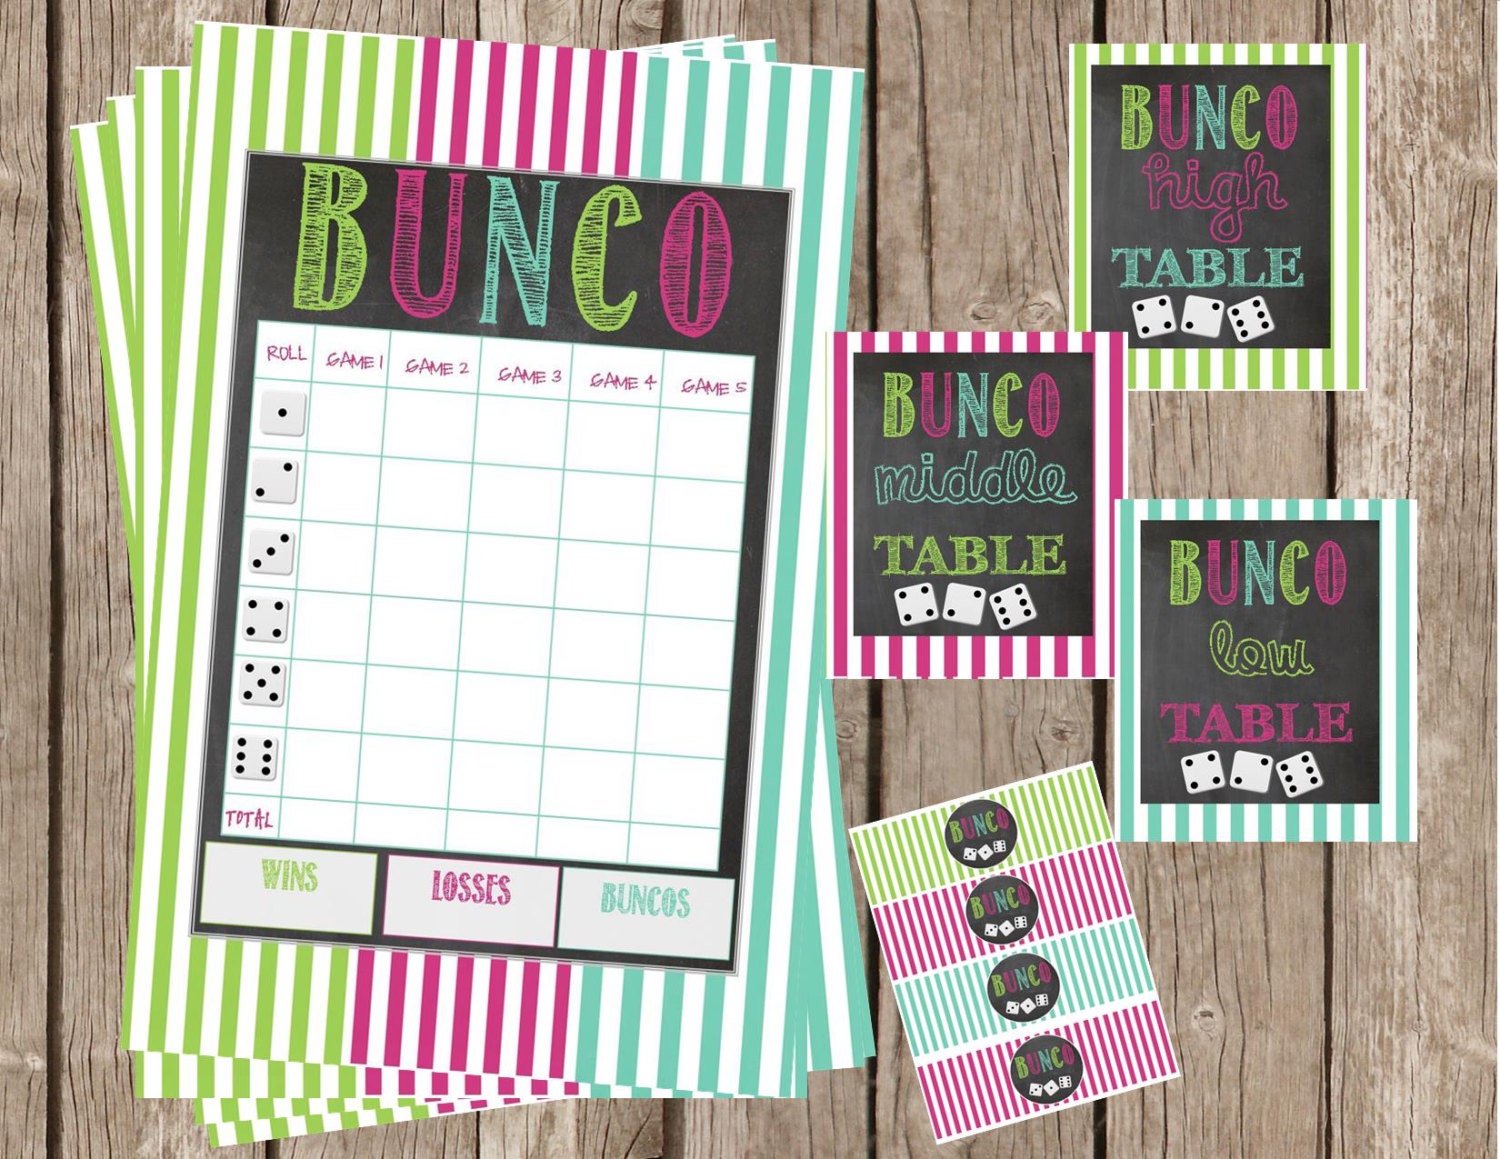 Mentioned image is image regarding bunco rating sheets printable tally legi...